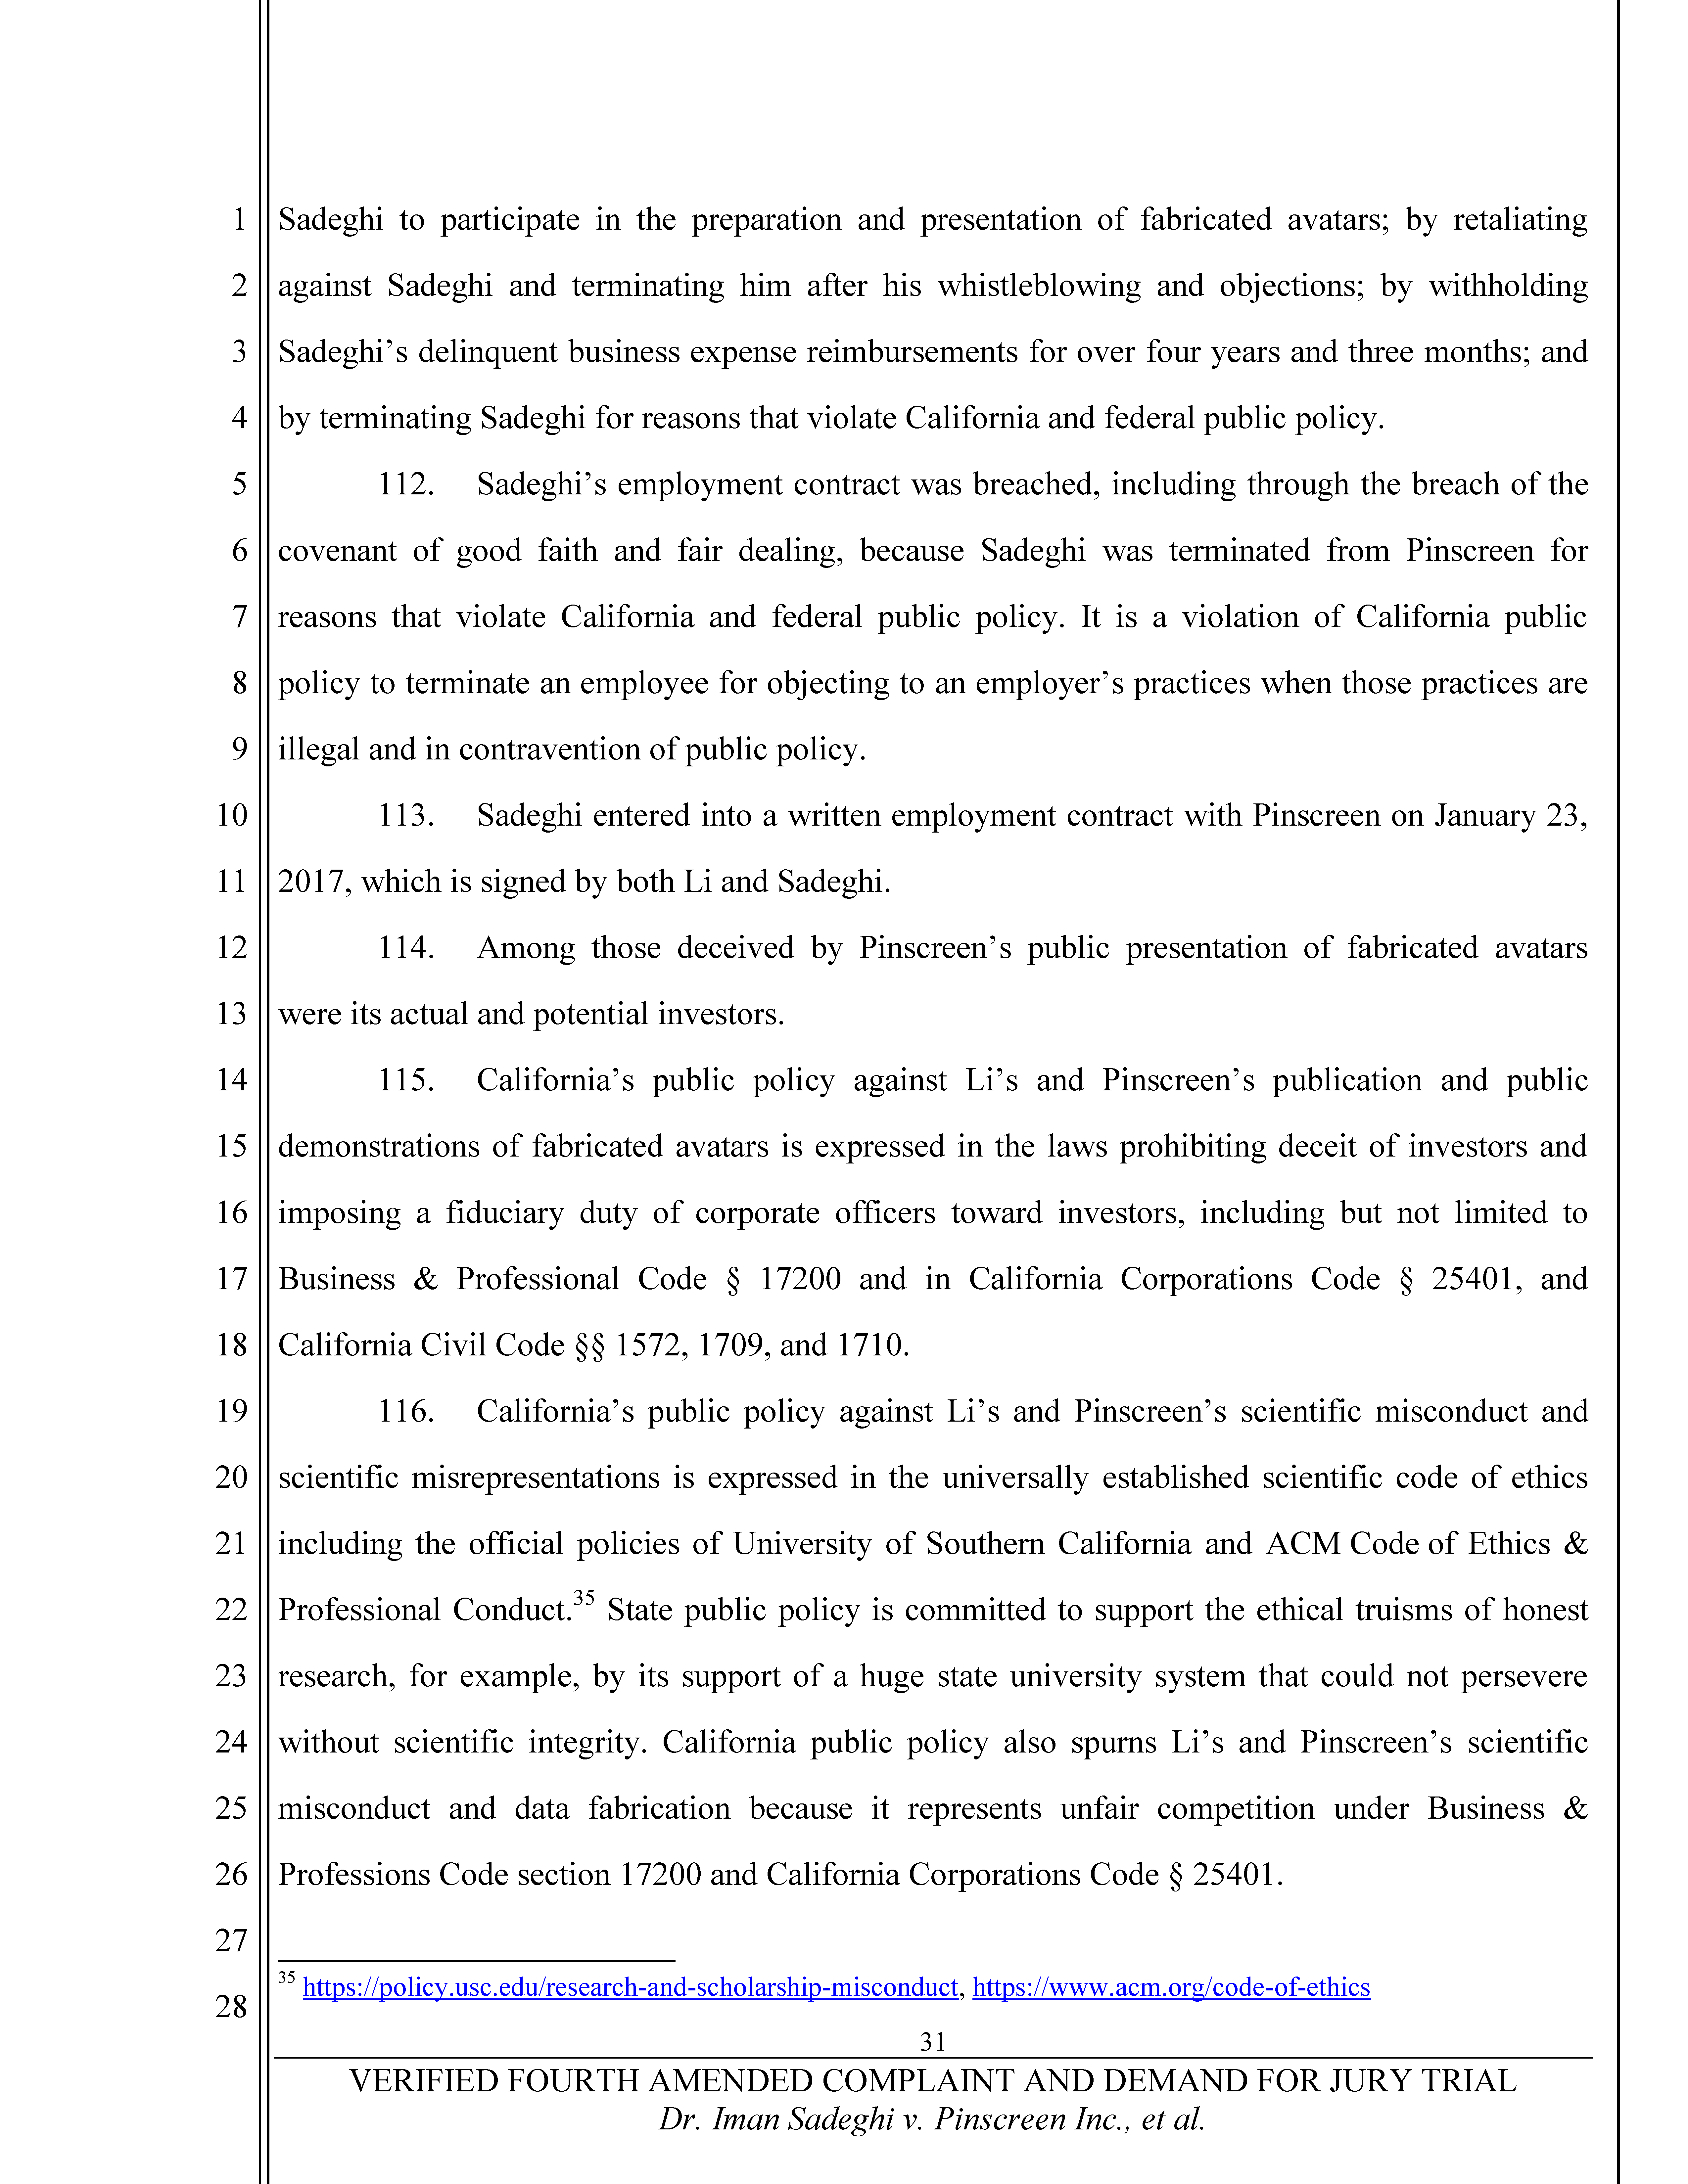 Fourth Amended Complaint (4AC) Page 32